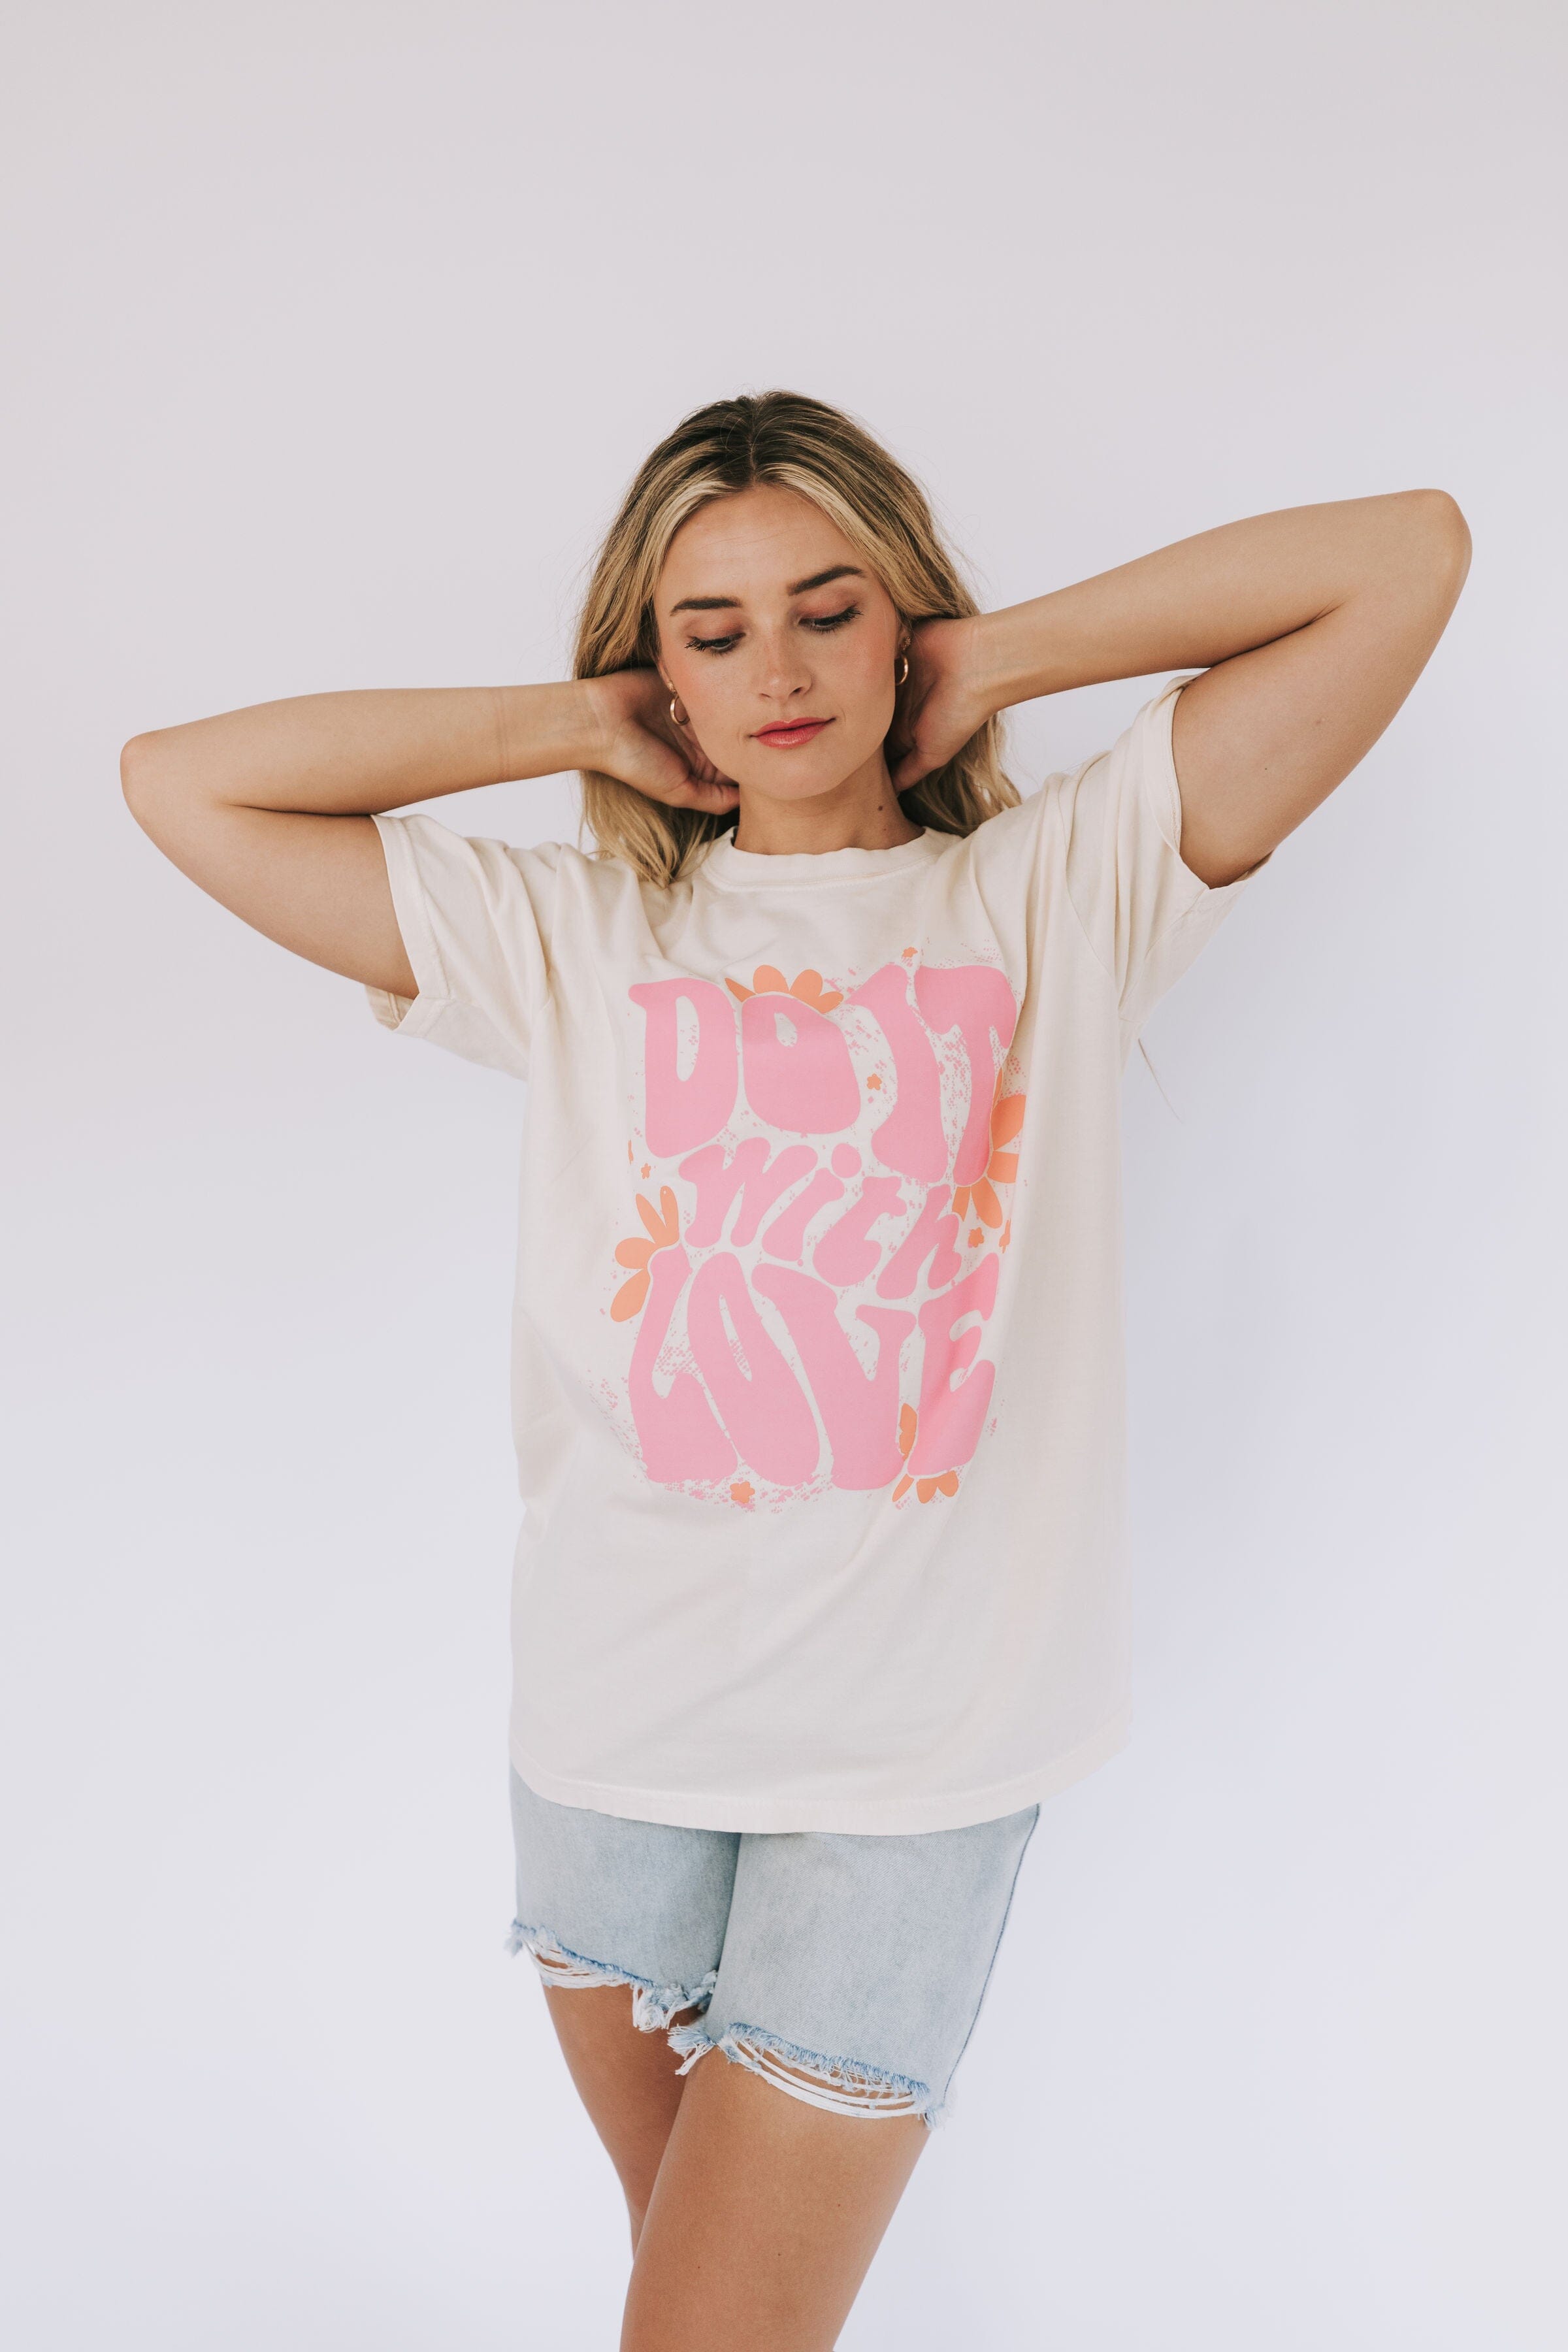 Do It With Love Graphic Tee- Extended Sizes!